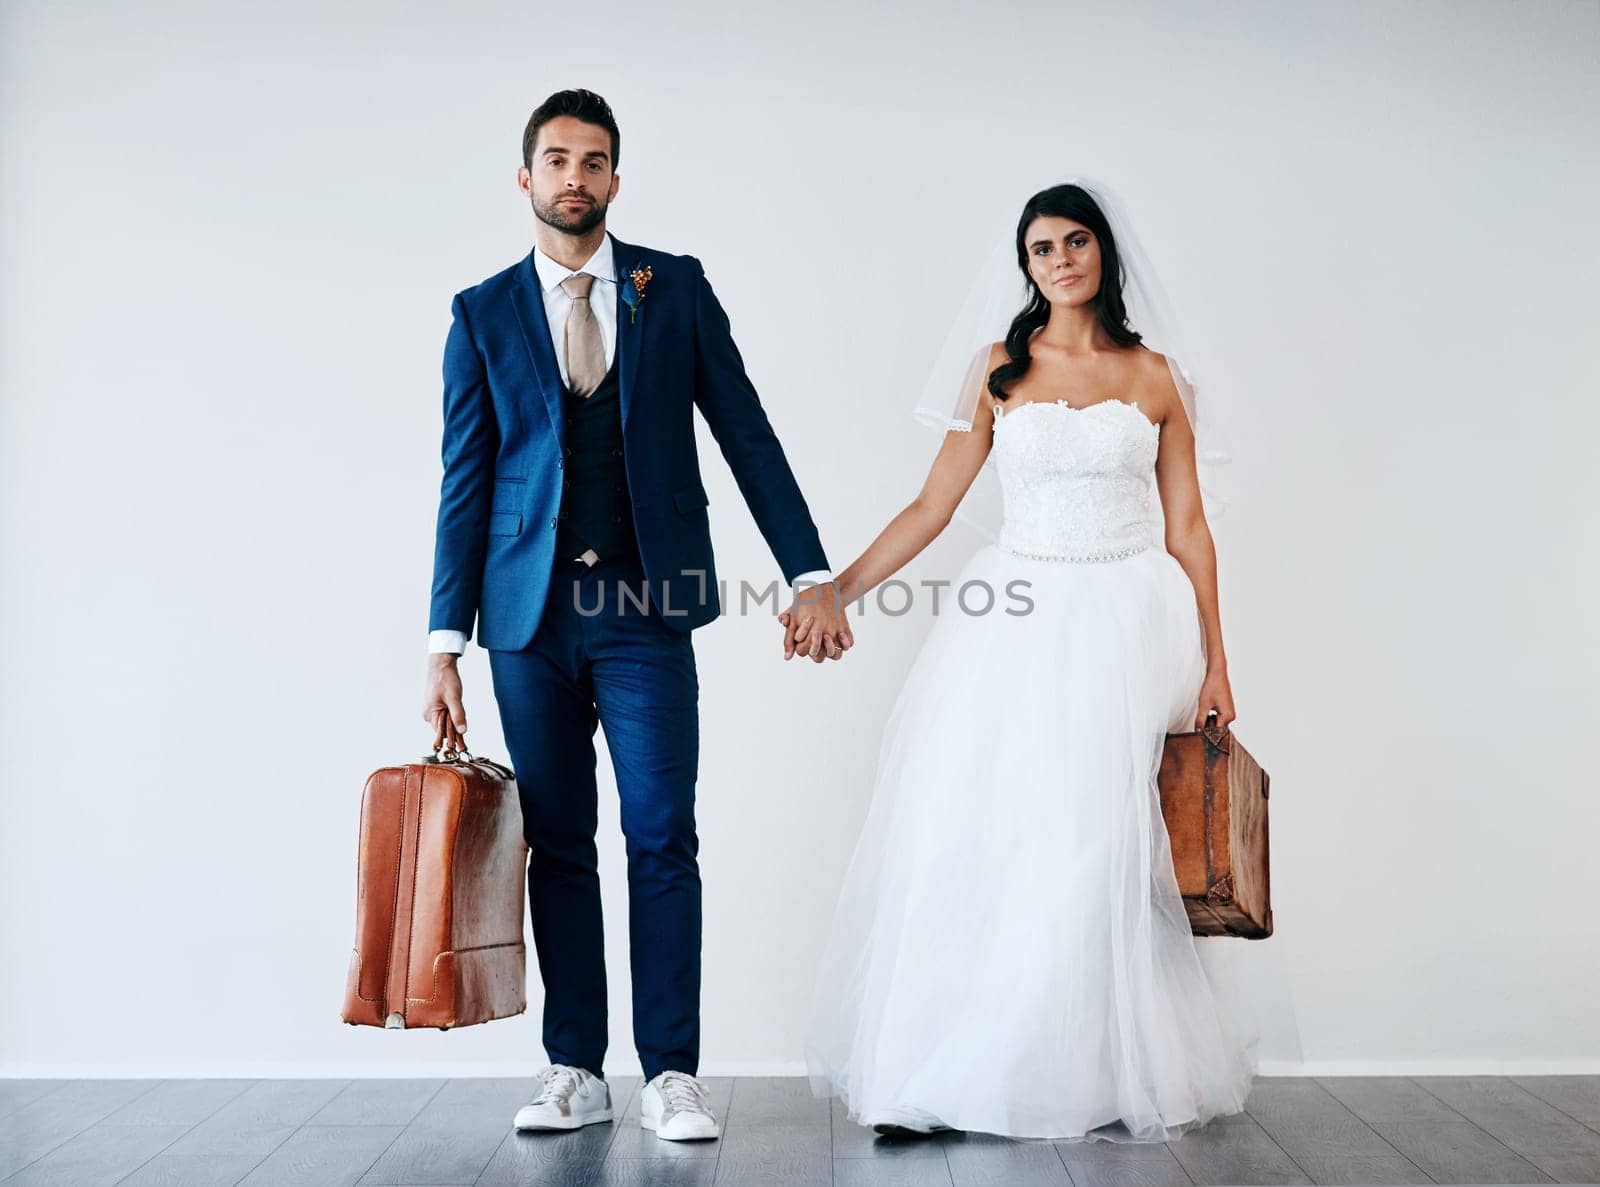 We have our travel shoes on. Studio shot of a newly married couple holding hand and carrying bags while standing against a gray background. by YuriArcurs